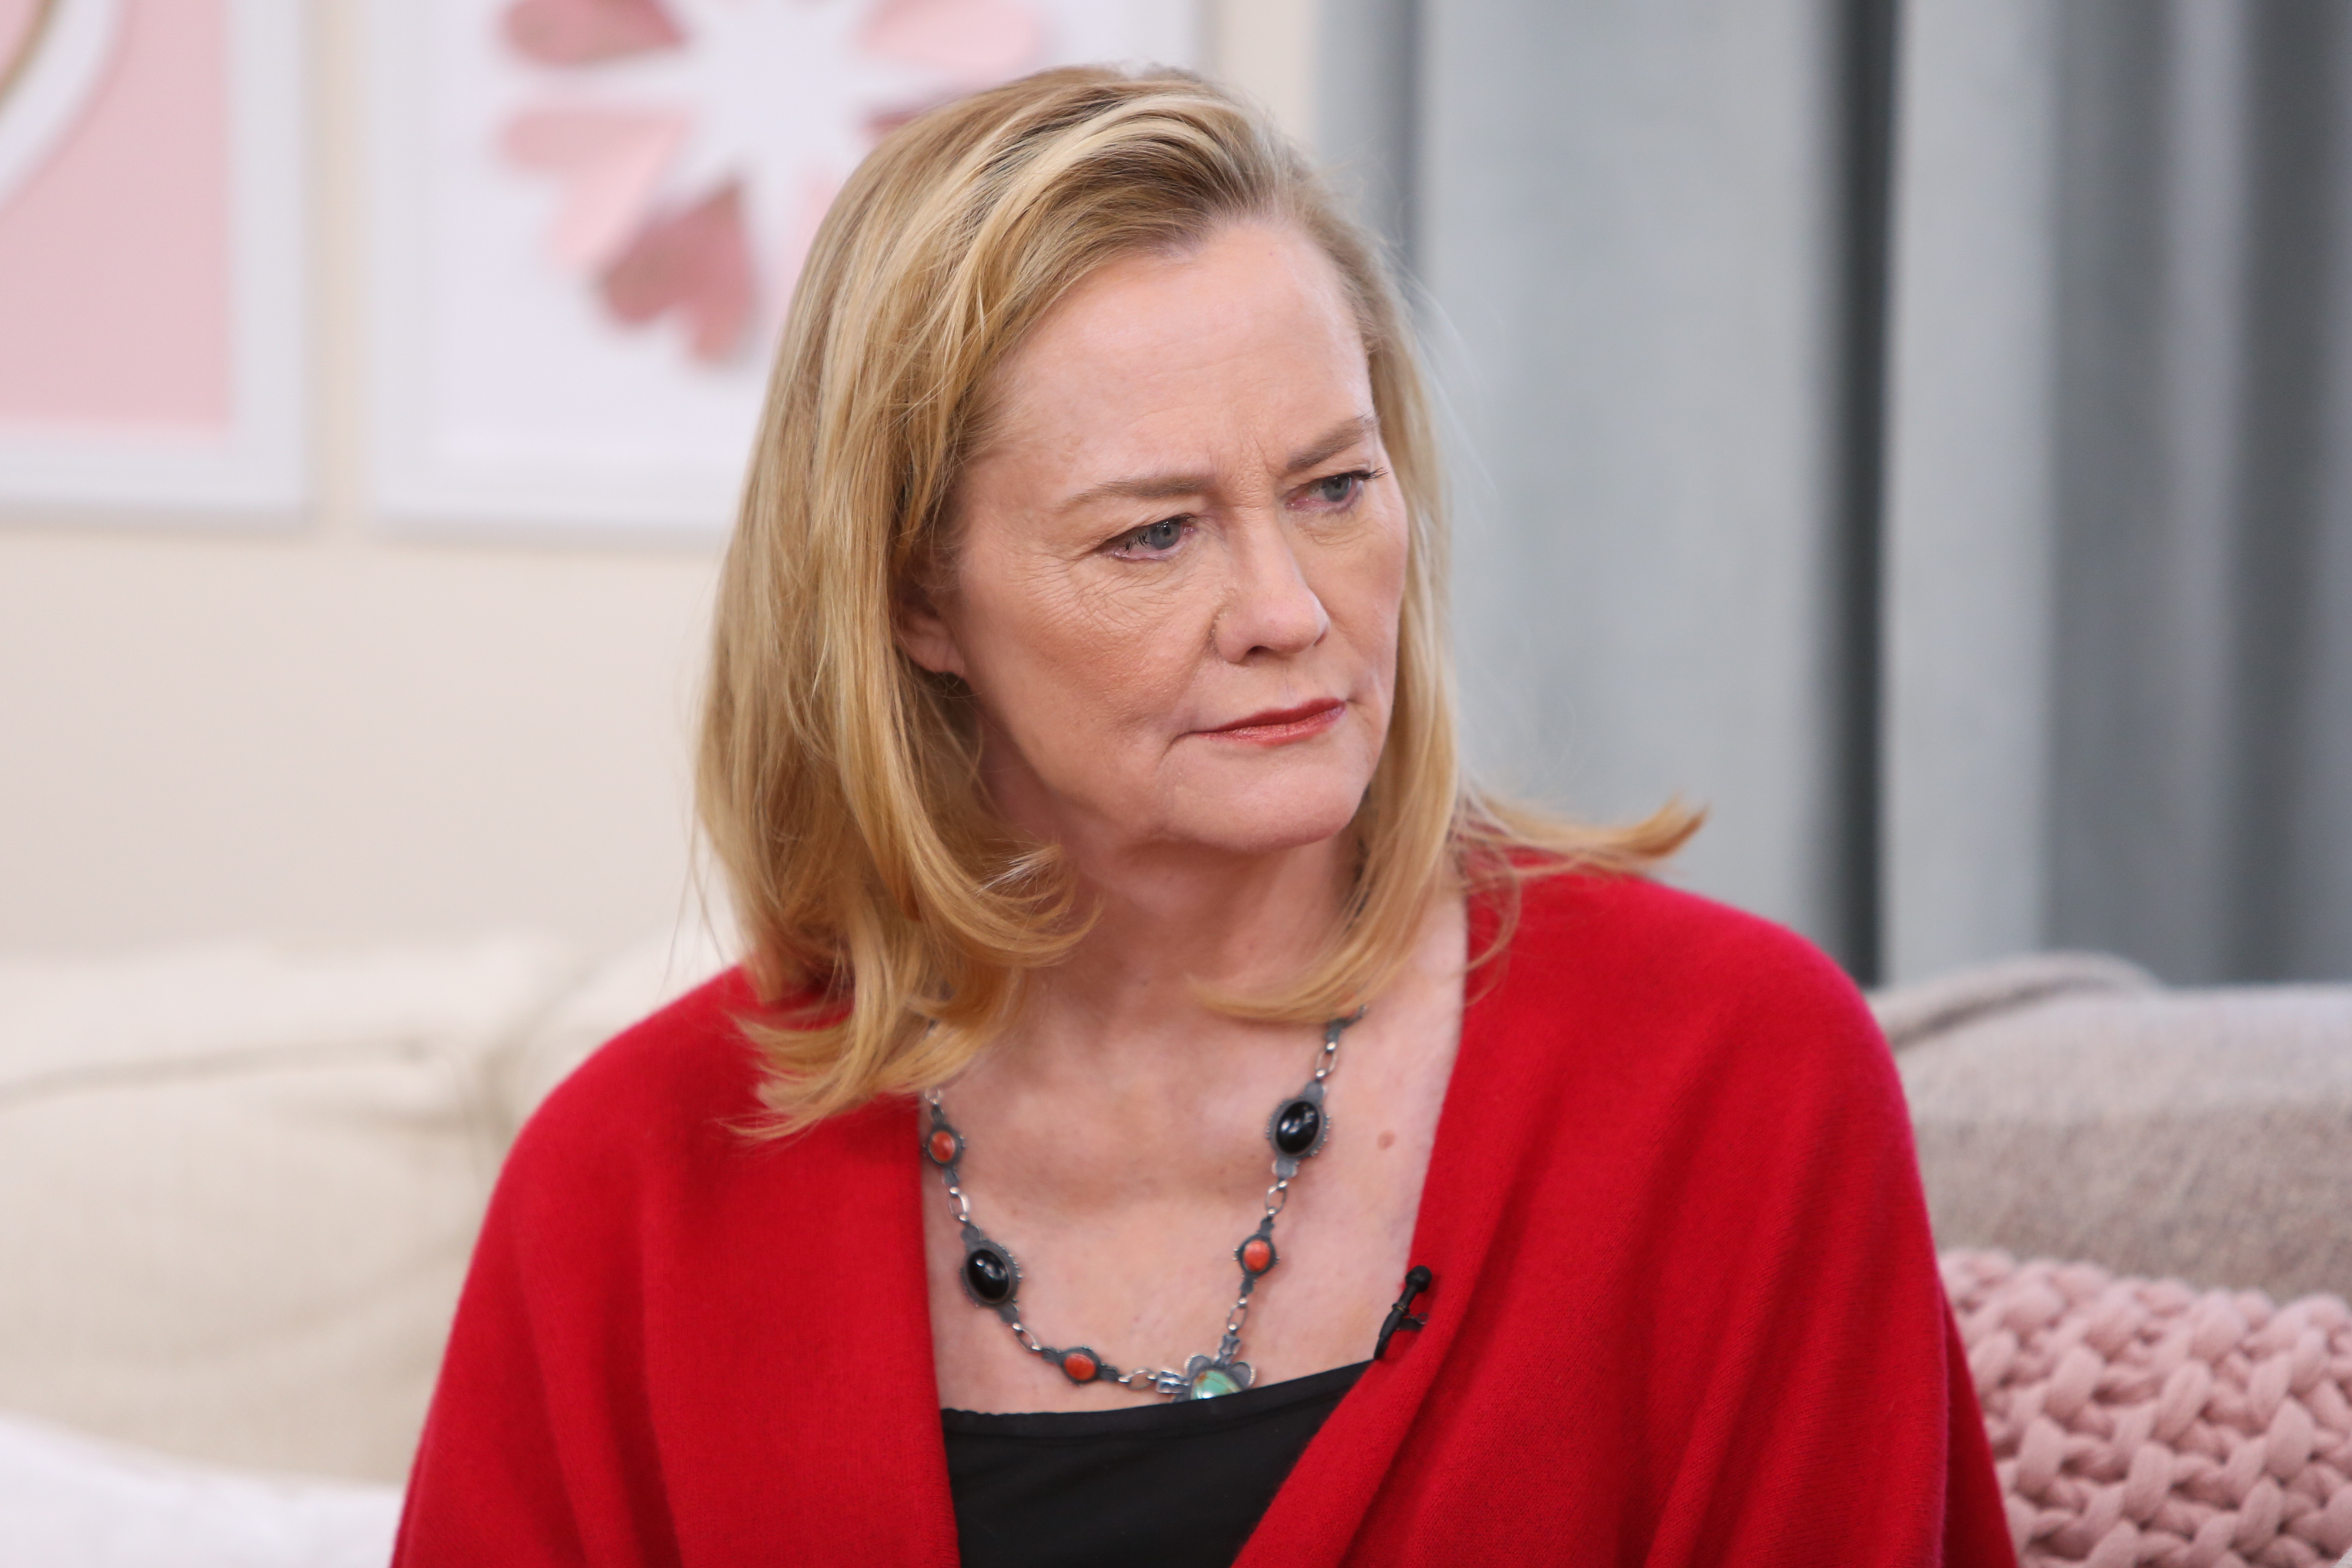 Cybill Shepherd at Hallmark's "Home & Family" at Universal Studios Hollywood on January 25, 2019, in Universal City, California. | Source: Getty Images